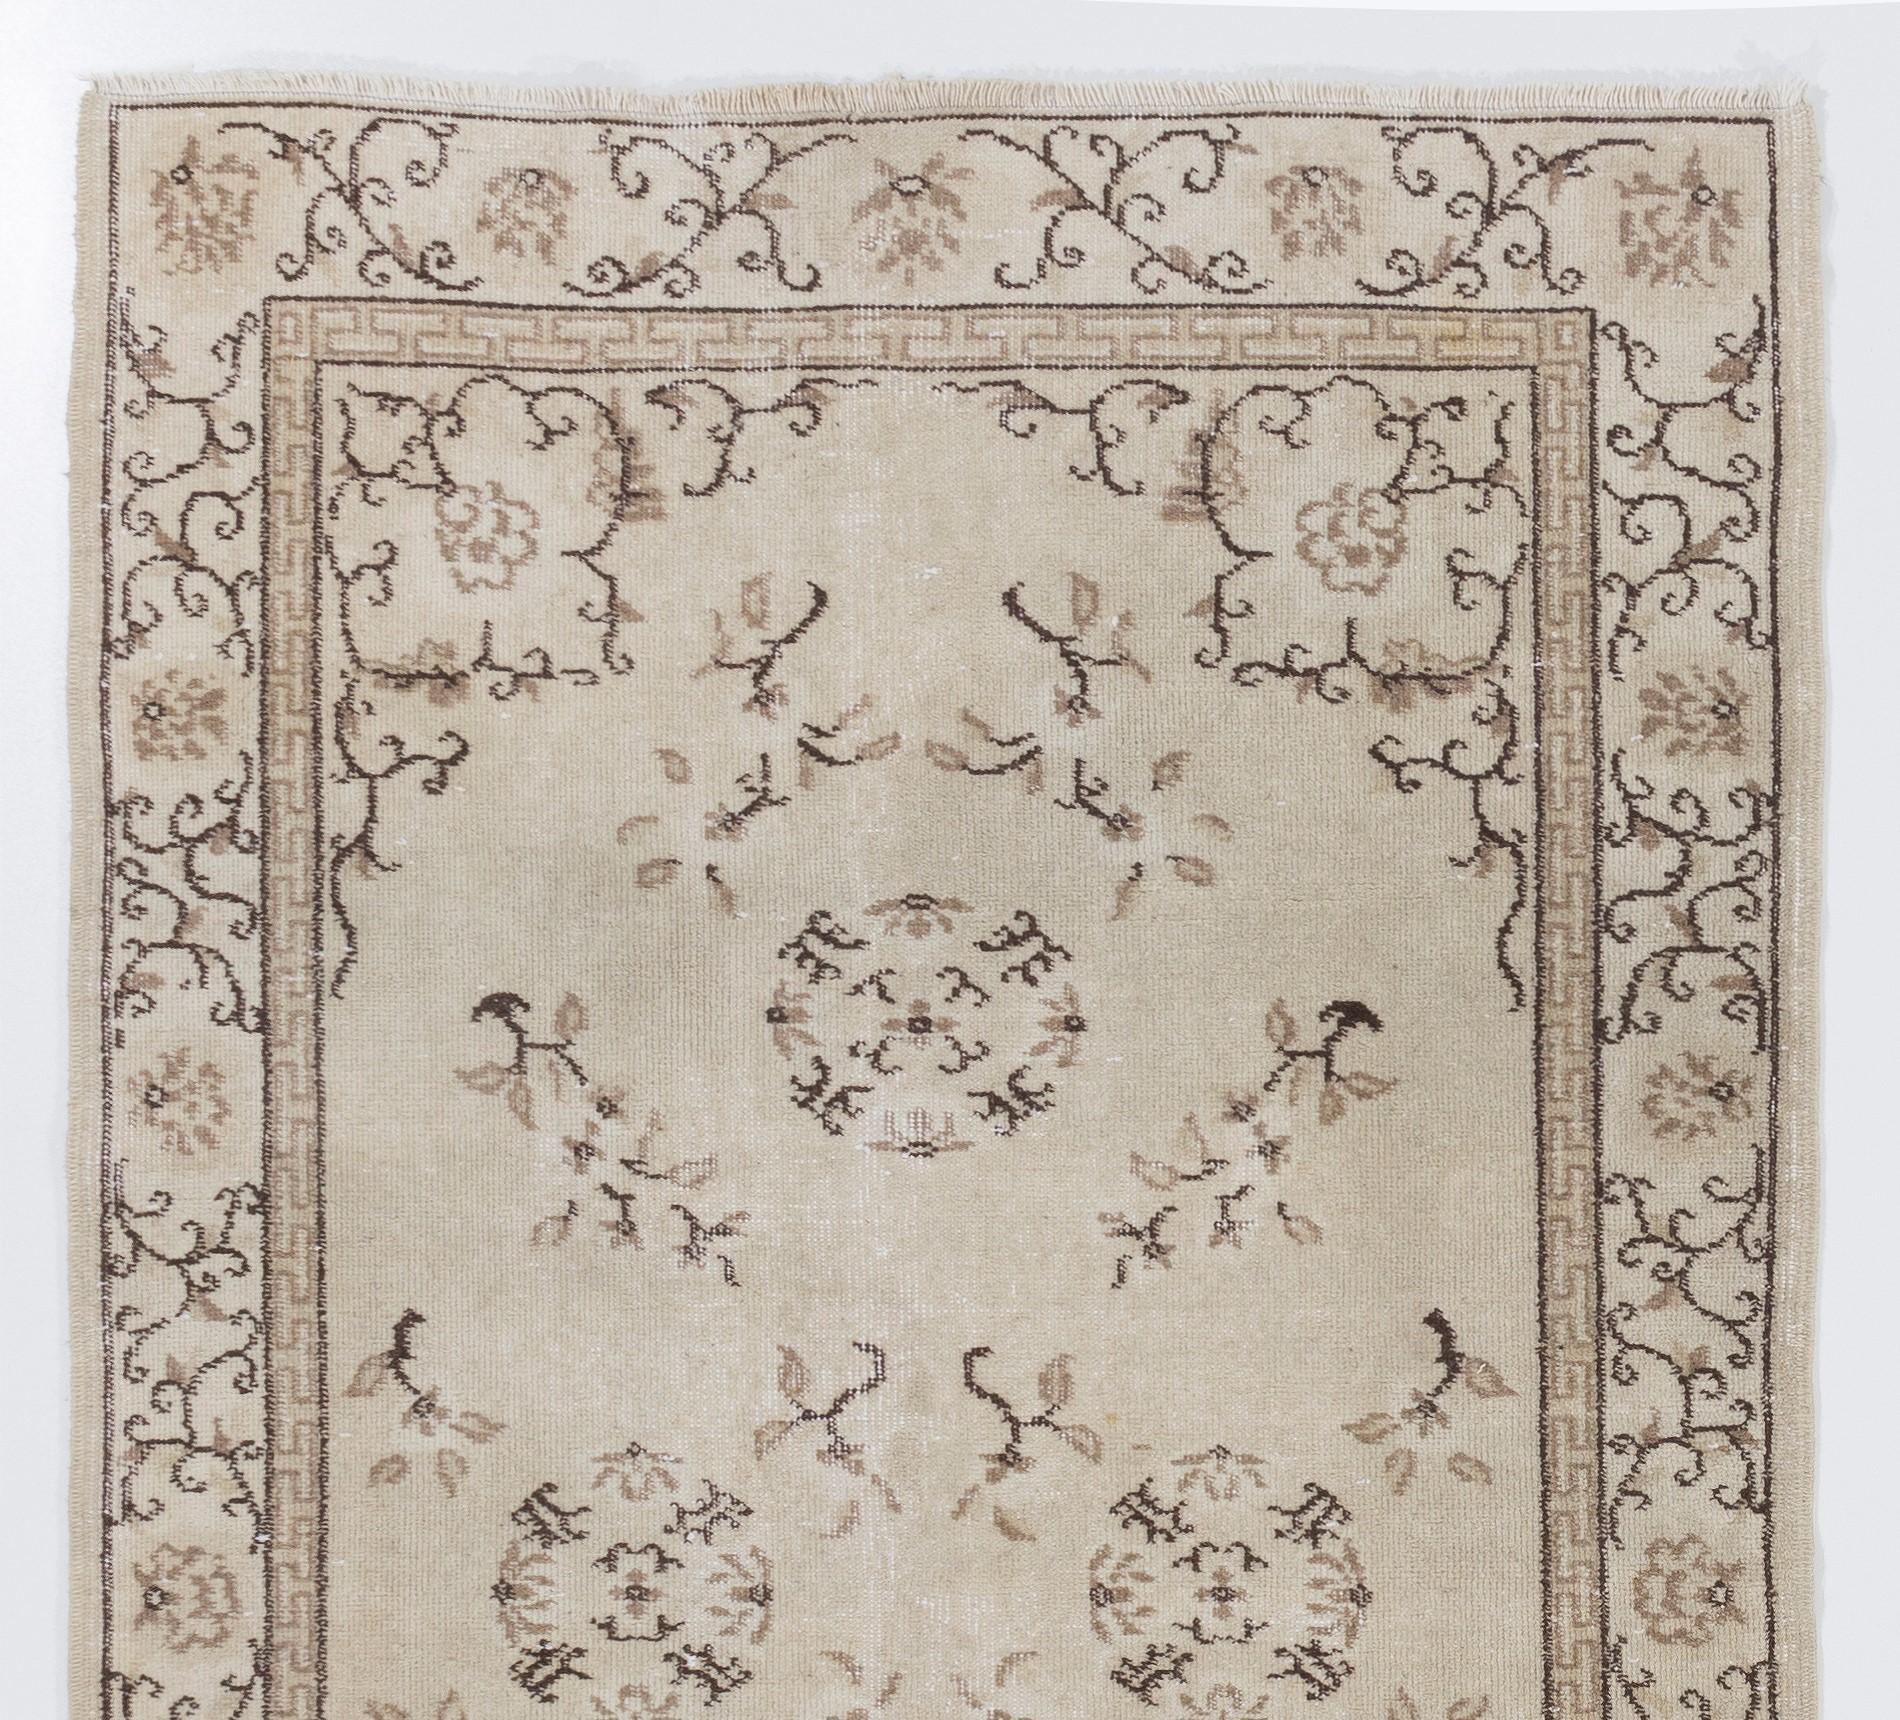 Art Deco Chinese design rug in beige, brown, taupe colors. Measure: 4 x 7 ft.

The brown outlines of rosettes as well as the meandering brown lines running through angular leaves all across the outer border are emphasized against a more softer